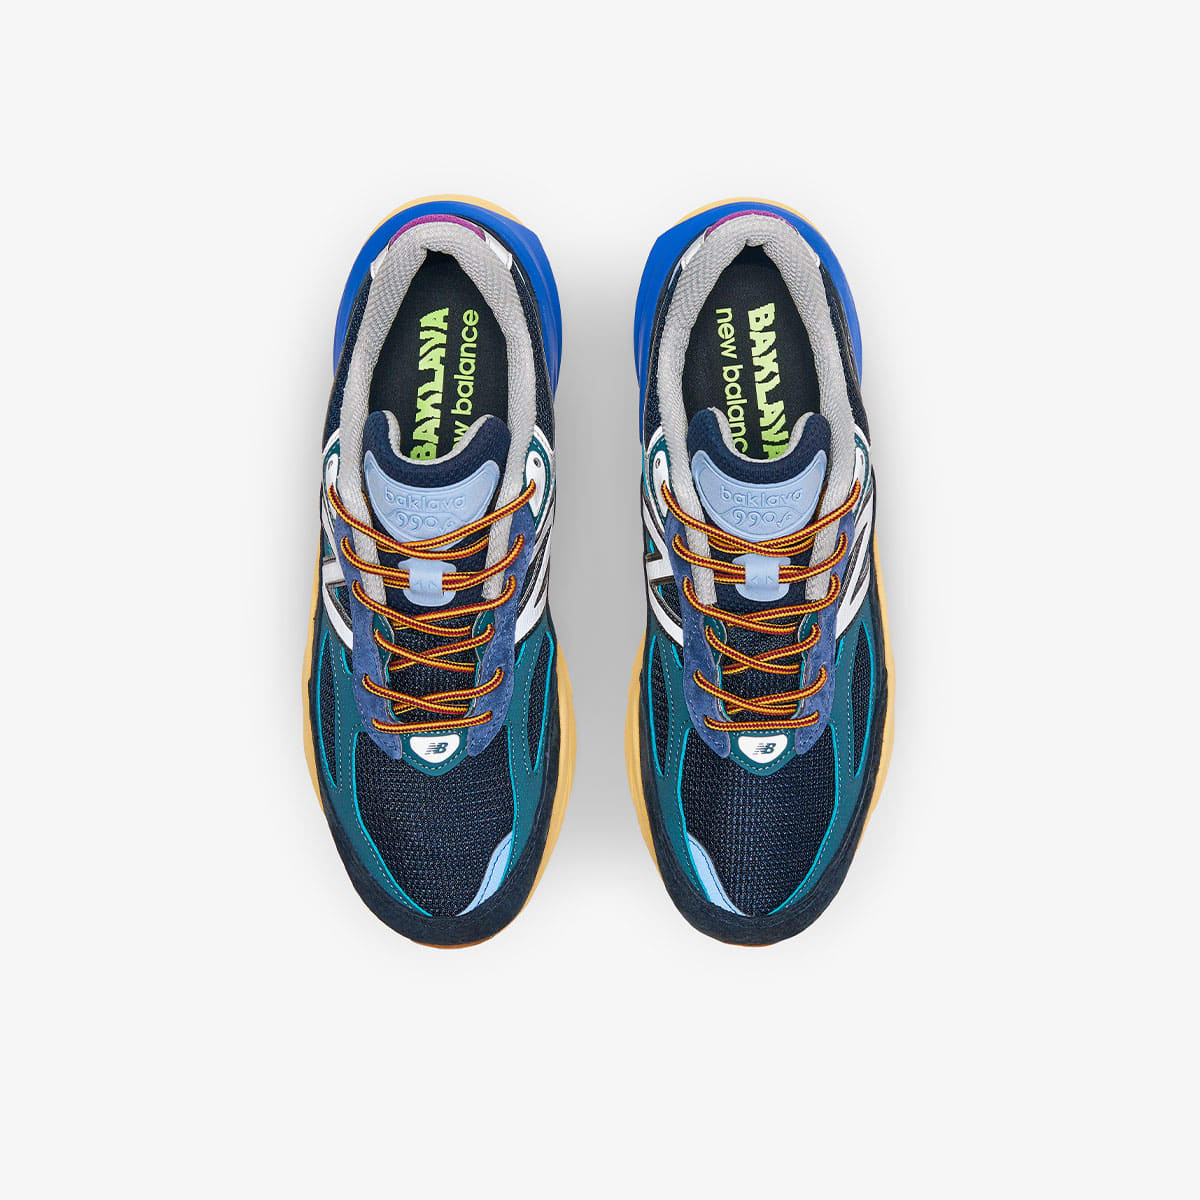 New Balance x Action Bronson 990V6 (Eclipse) | END. Launches